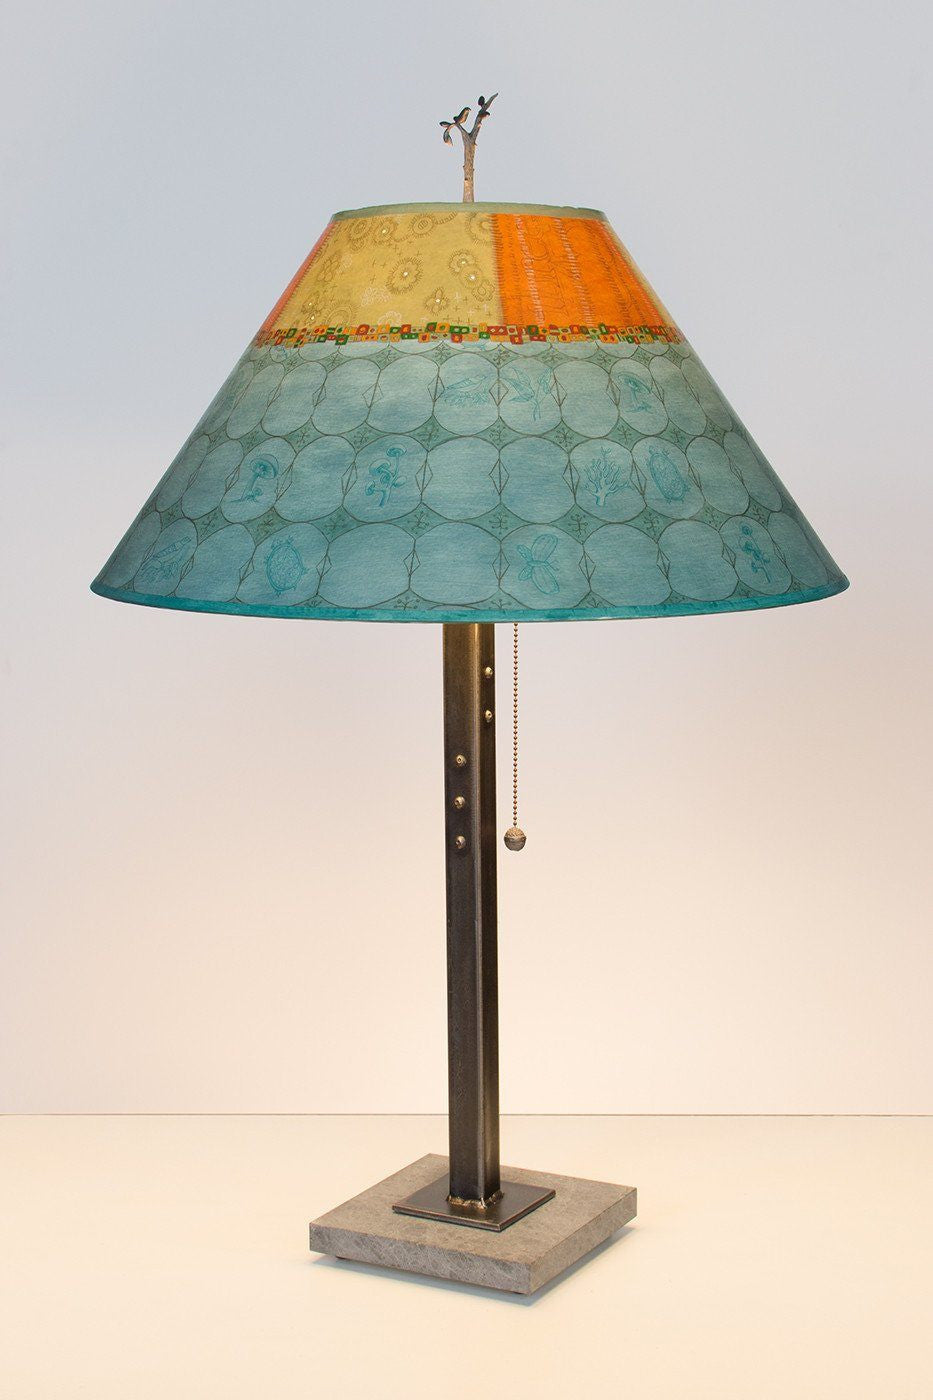 Janna Ugone & Co Table Lamps Steel Table Lamp with Large Conical Shade in Paradise Pool